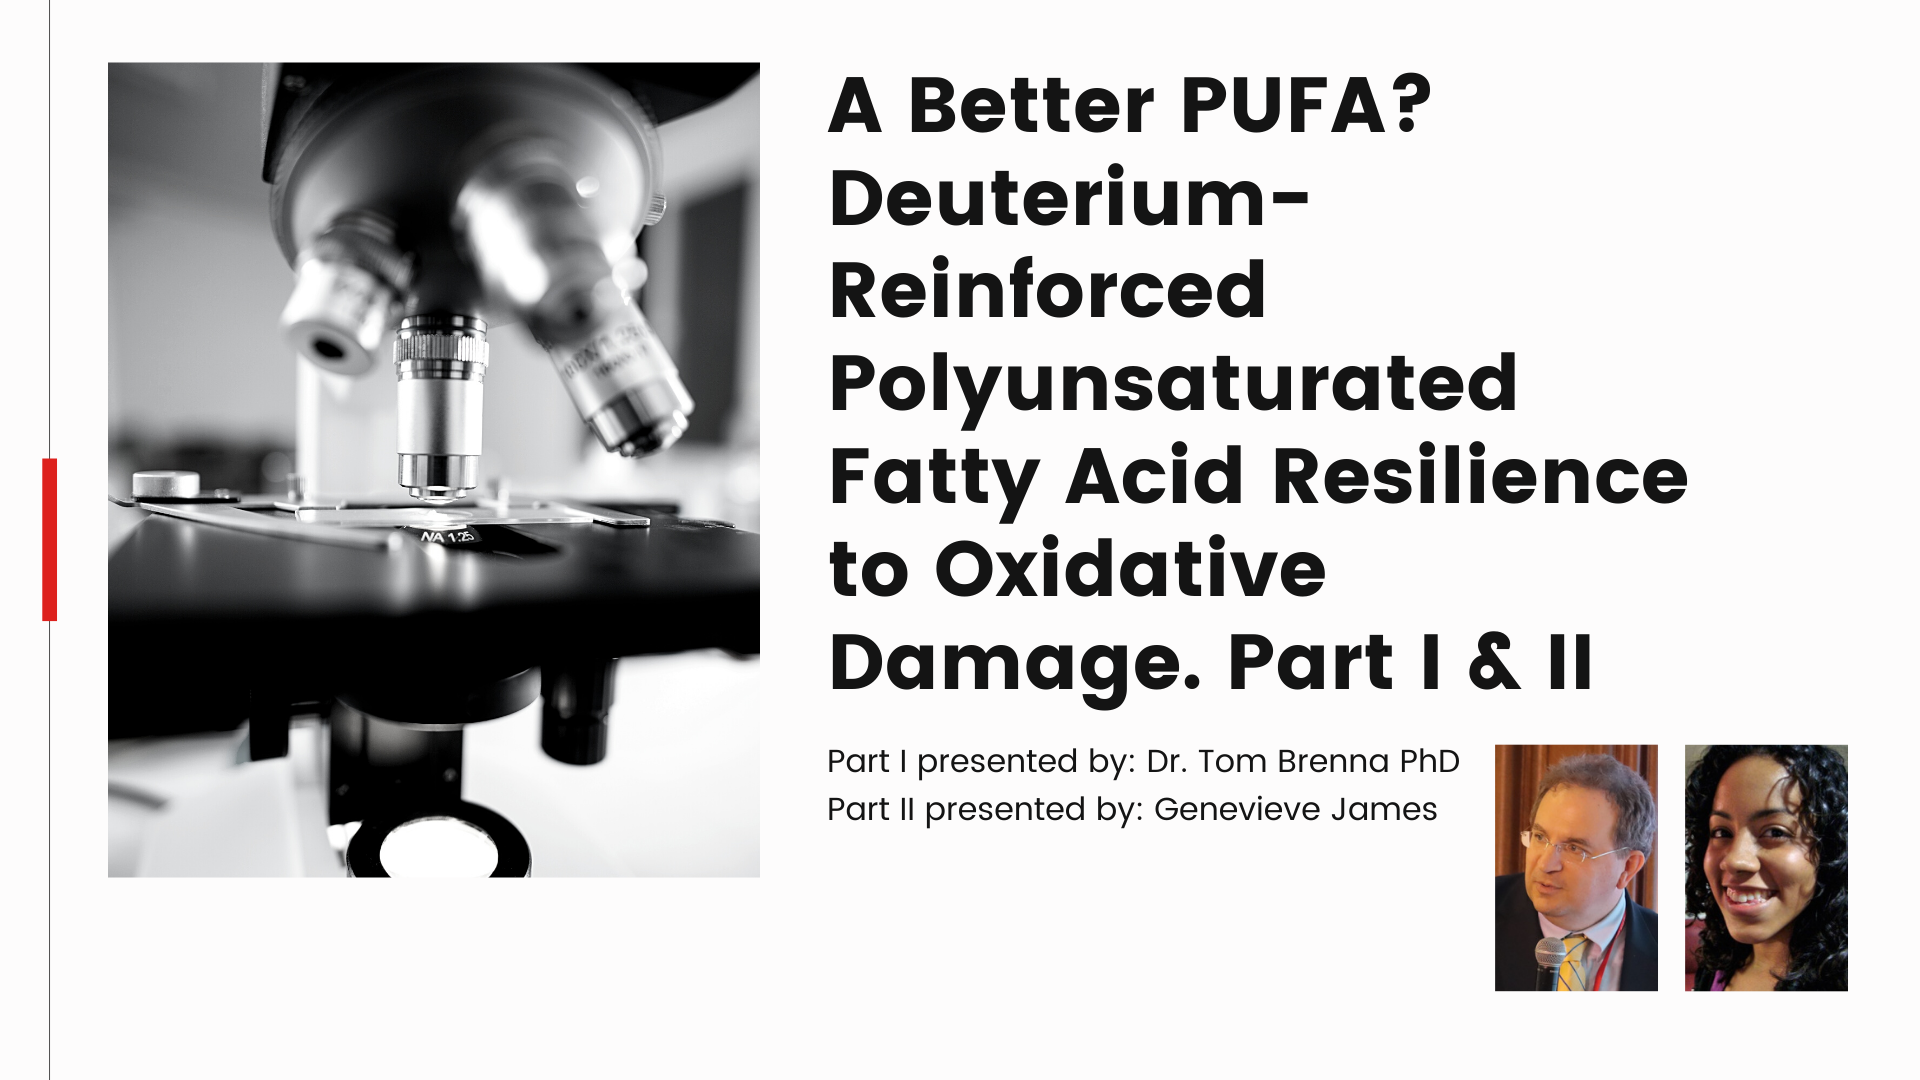 A Better PUFA Deuterium Reinforced Polyunsaturated Fatty Acid Resilience to Oxidative Damagepng